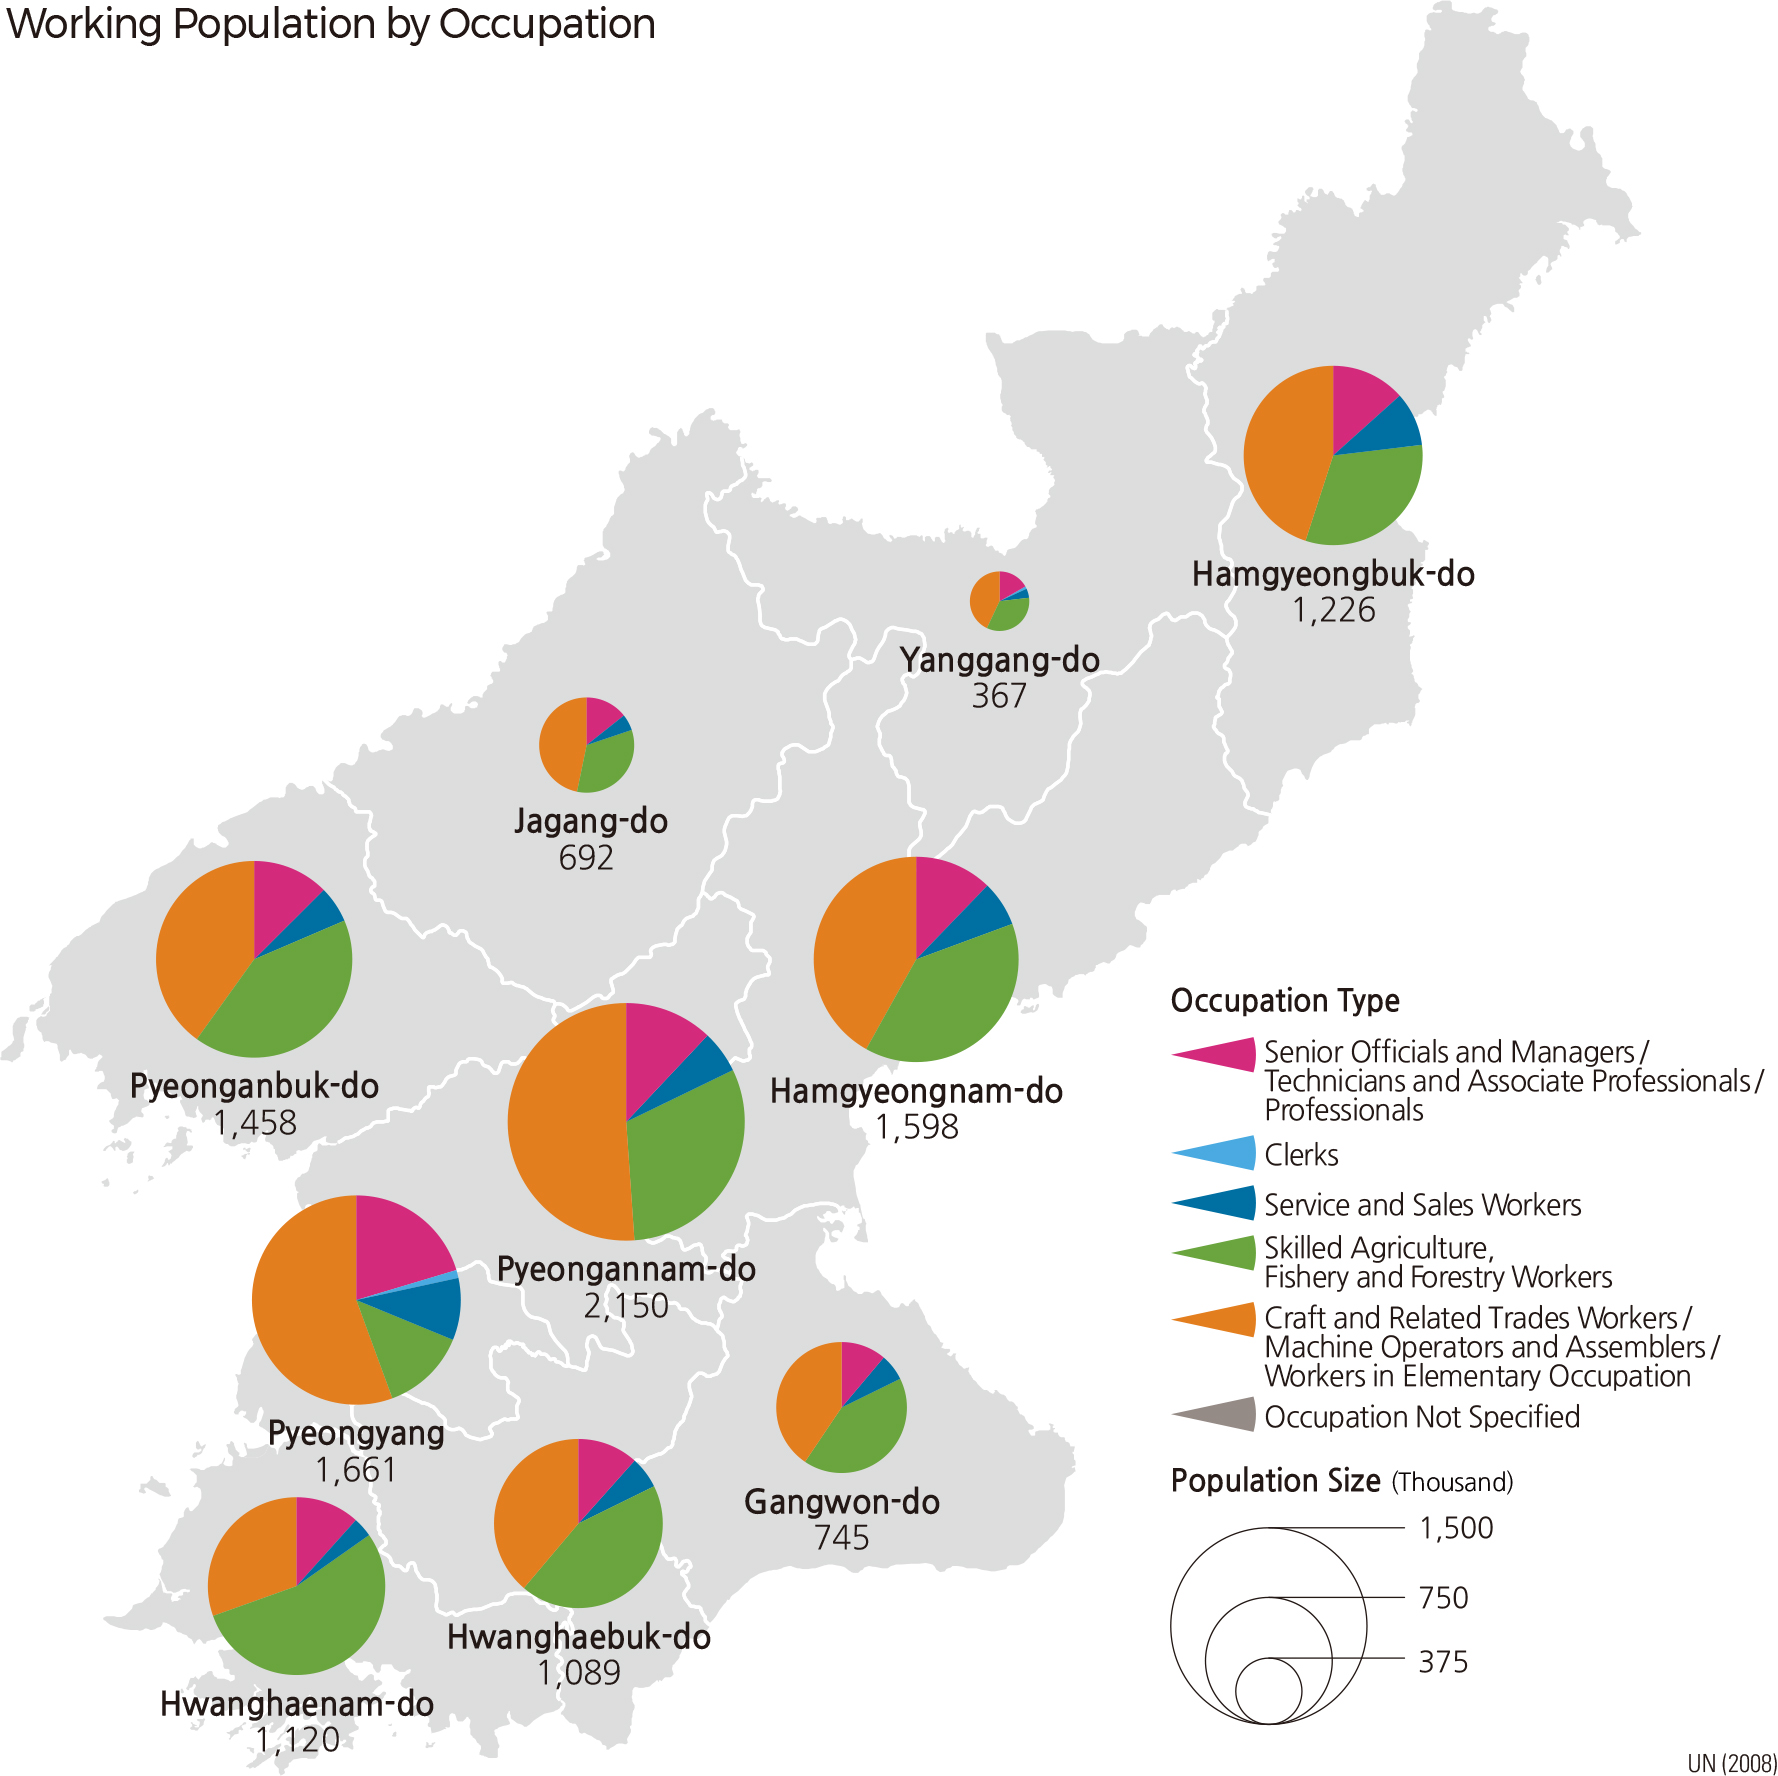 Working Population by Occupation